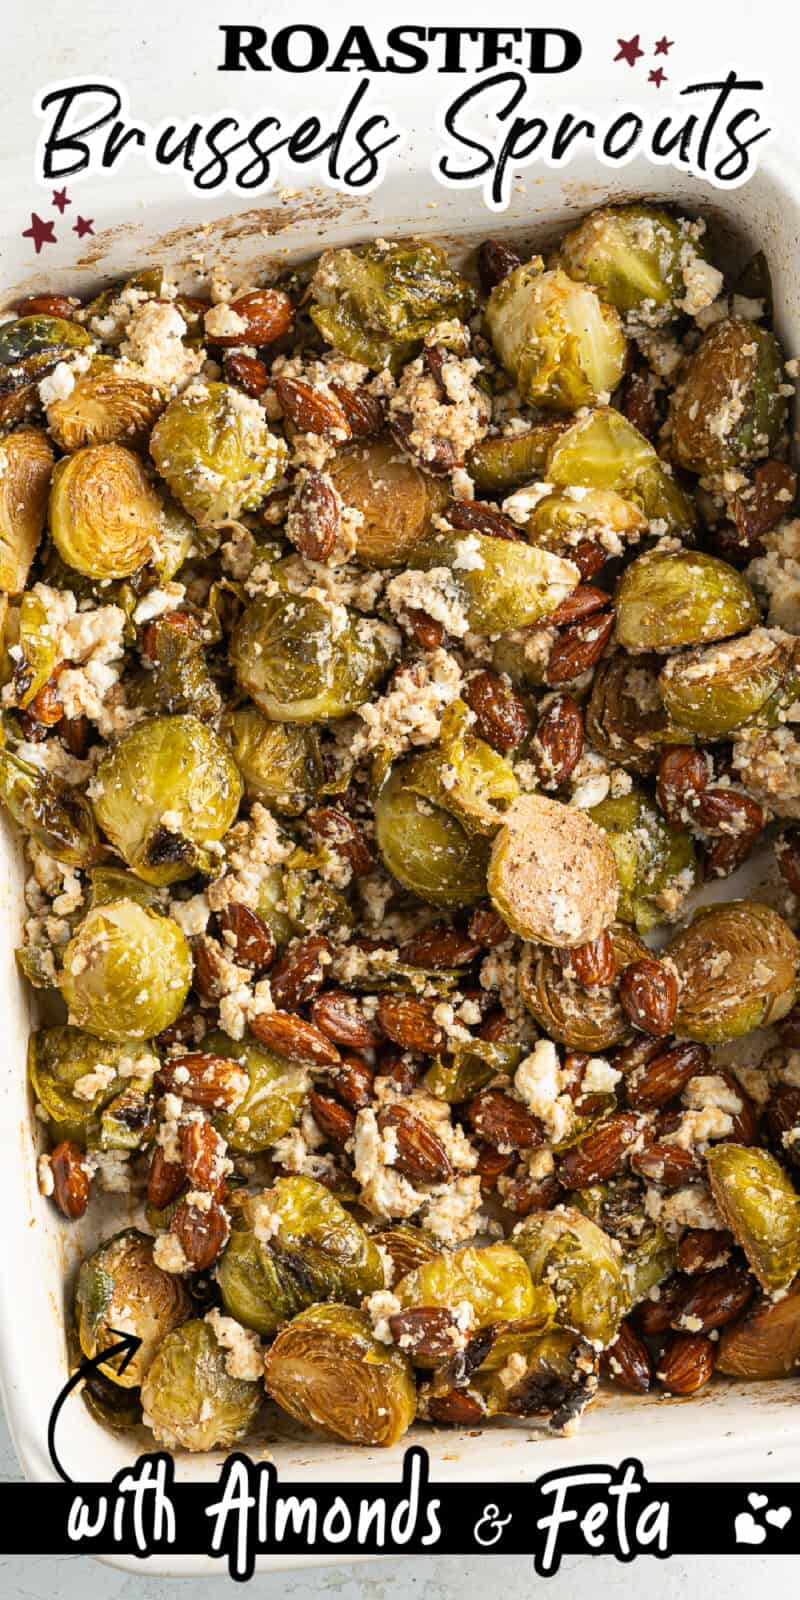 food, with Roasted Brussels Sprouts with Almonds and Feta